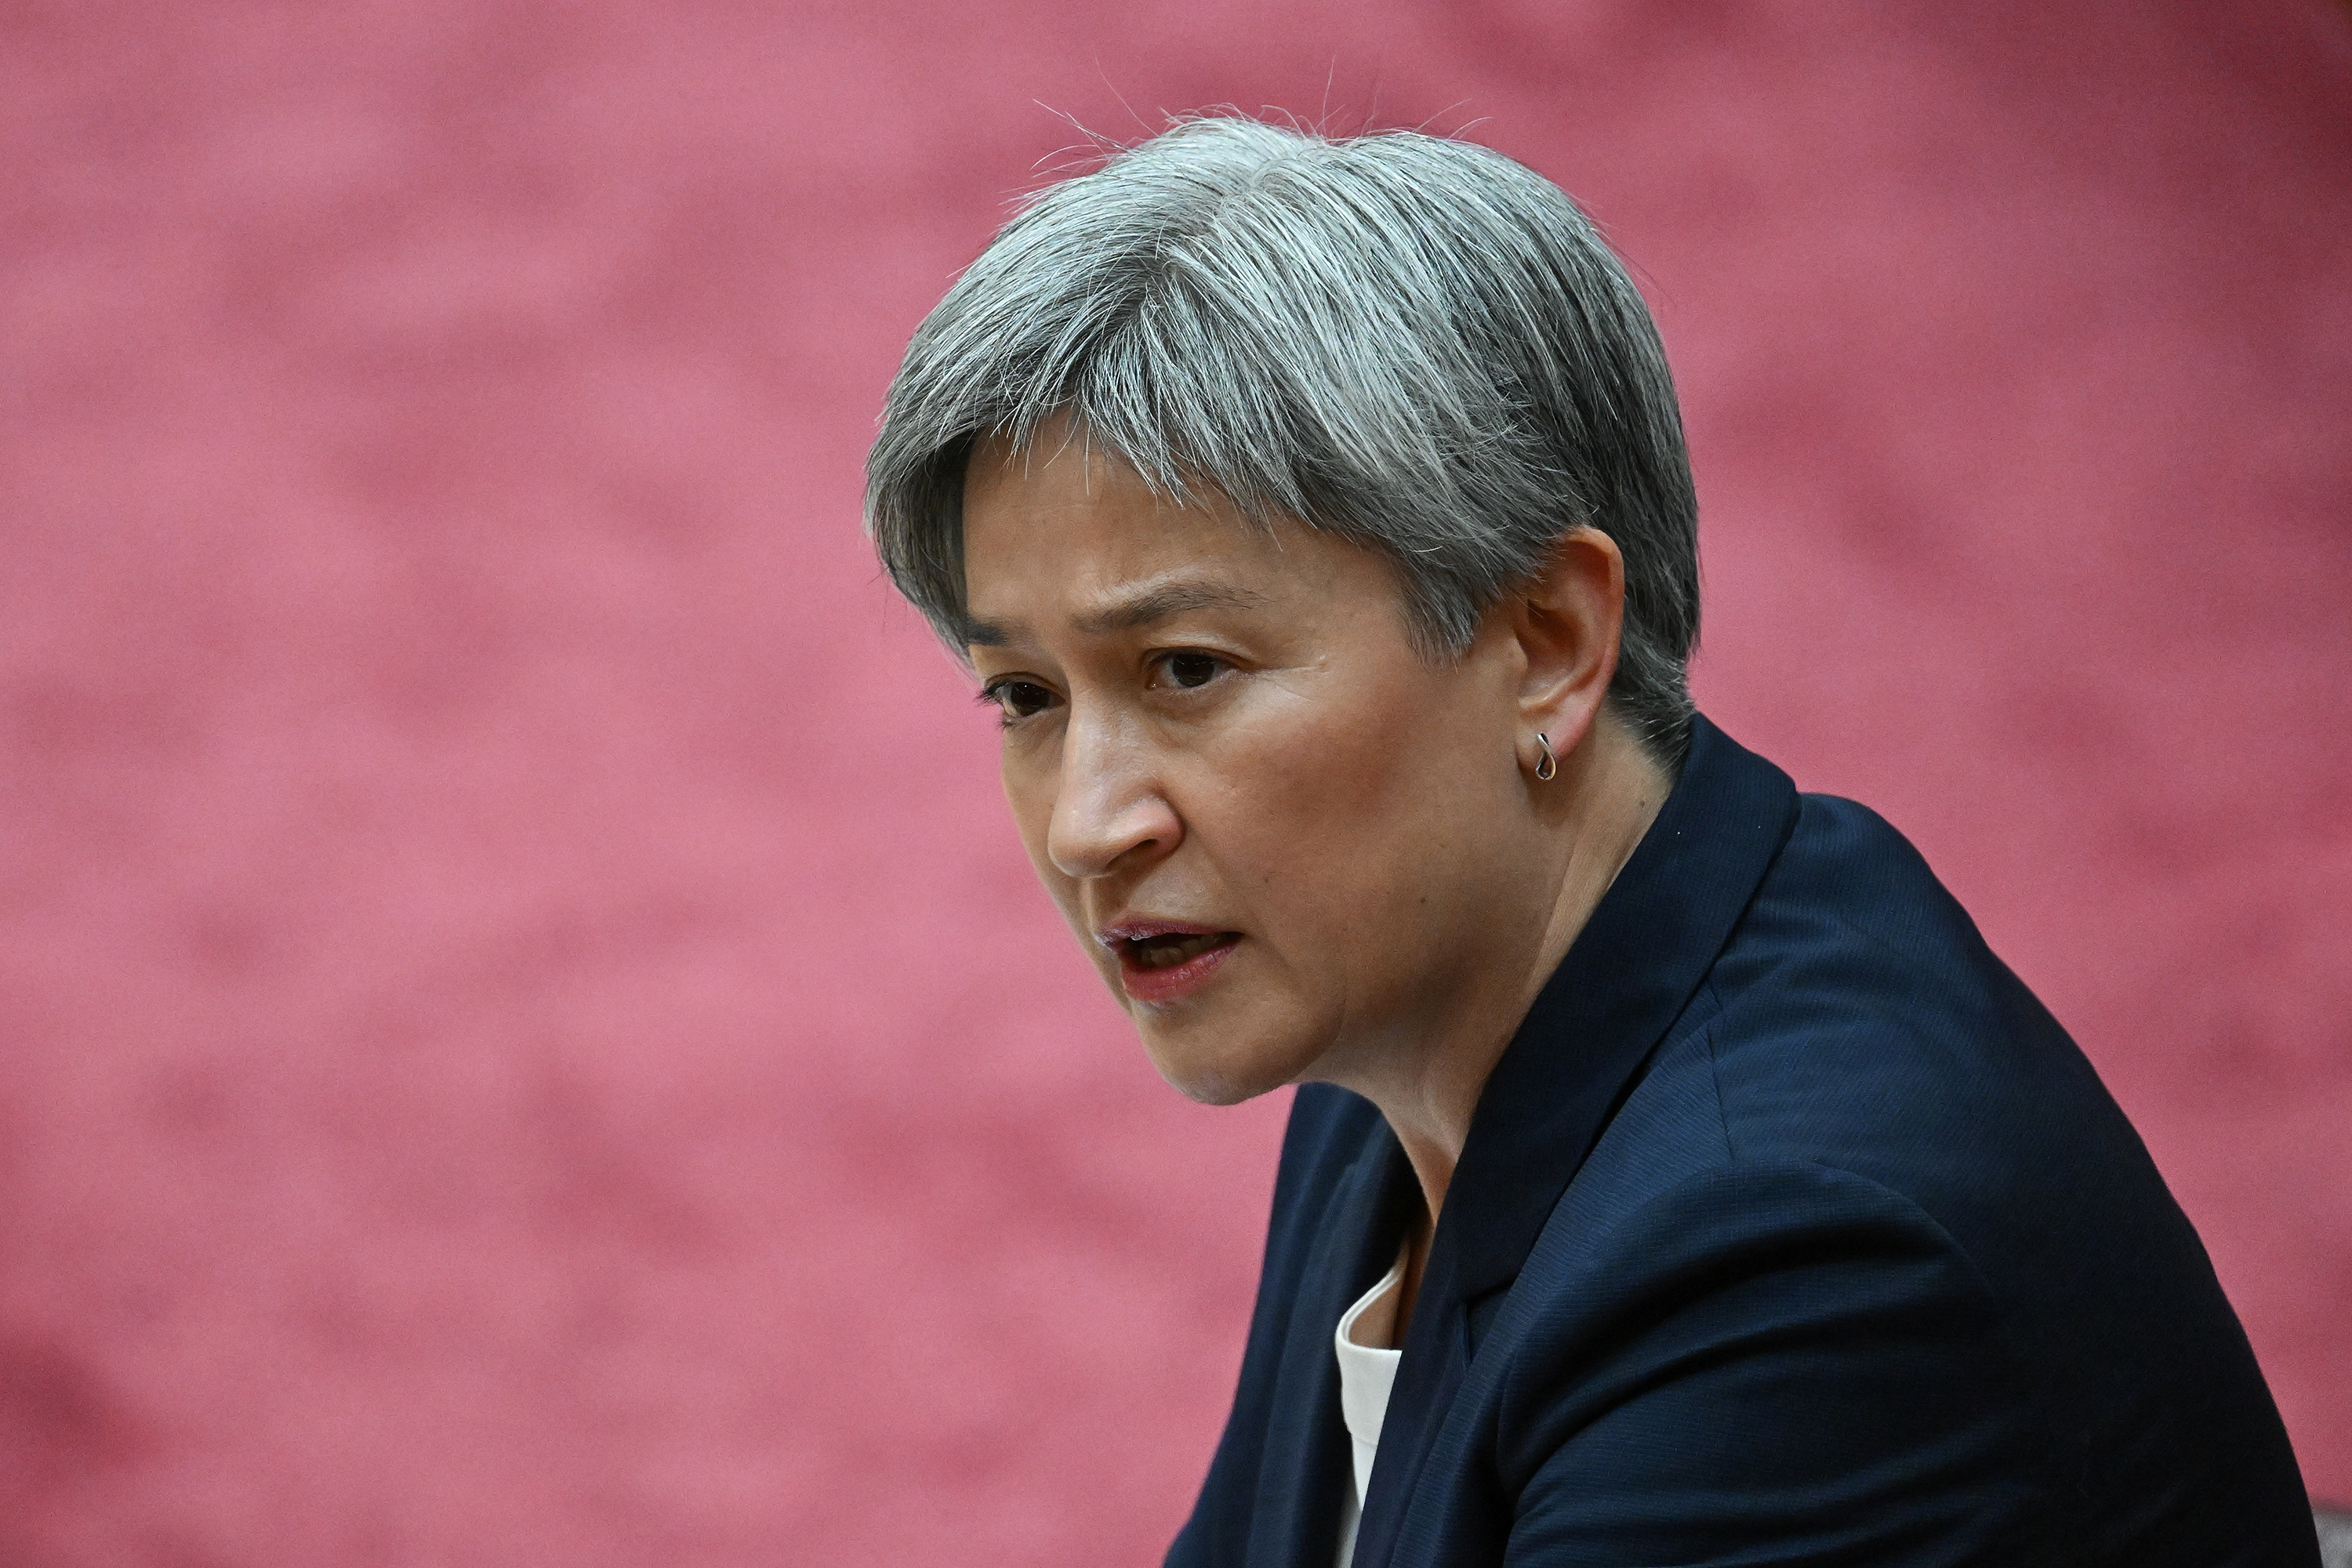 Australian Foreign Minister Penny Wong speaks during Question Time in the Senate chamber at Parliament House in Canberra, Australia, on November 9.